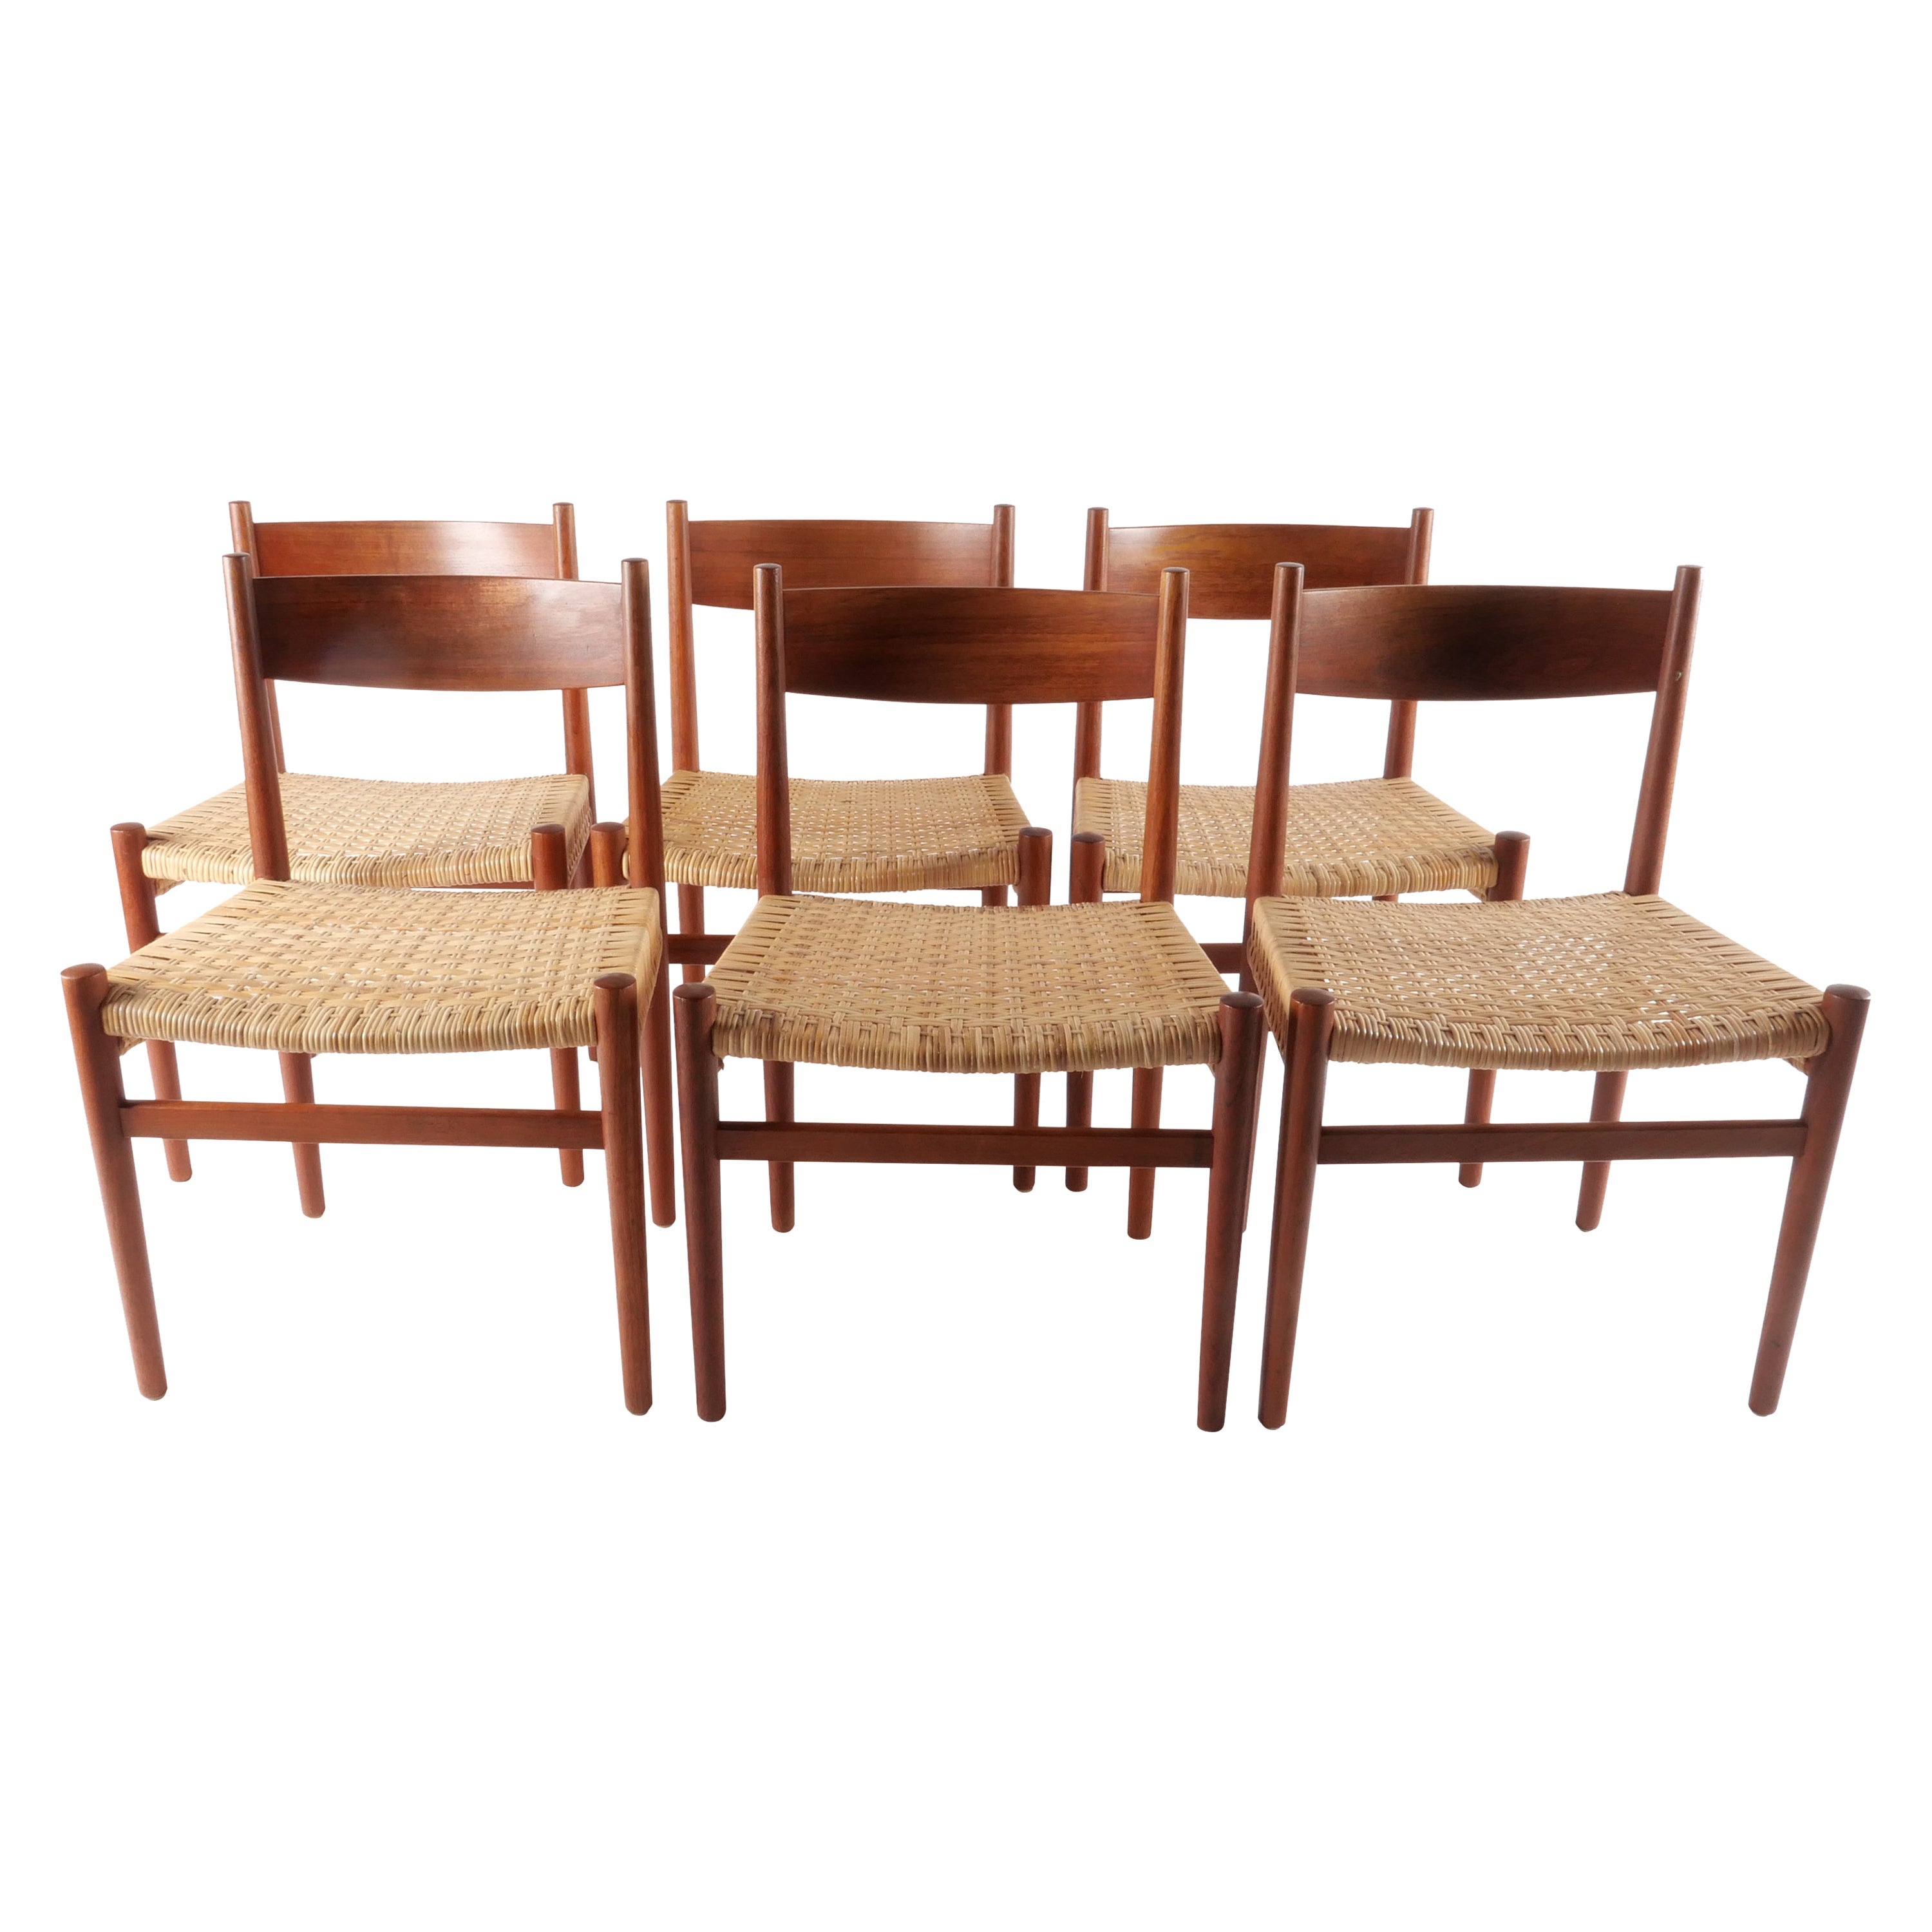 Teak and cane model CH40 dining chairs by Hans J. Wegner, a set of six